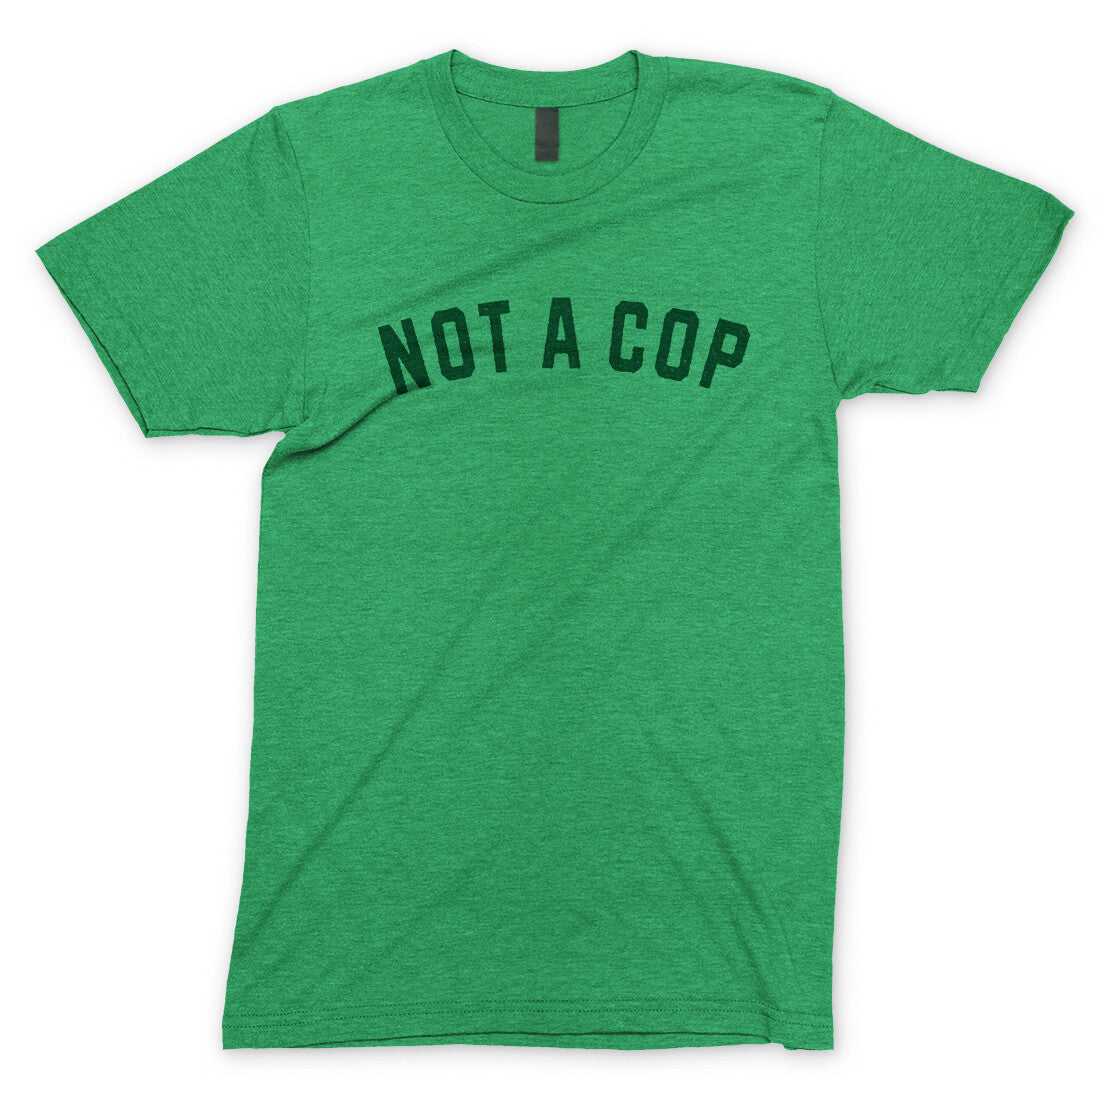 Not a Cop in Heather Irish Green Color